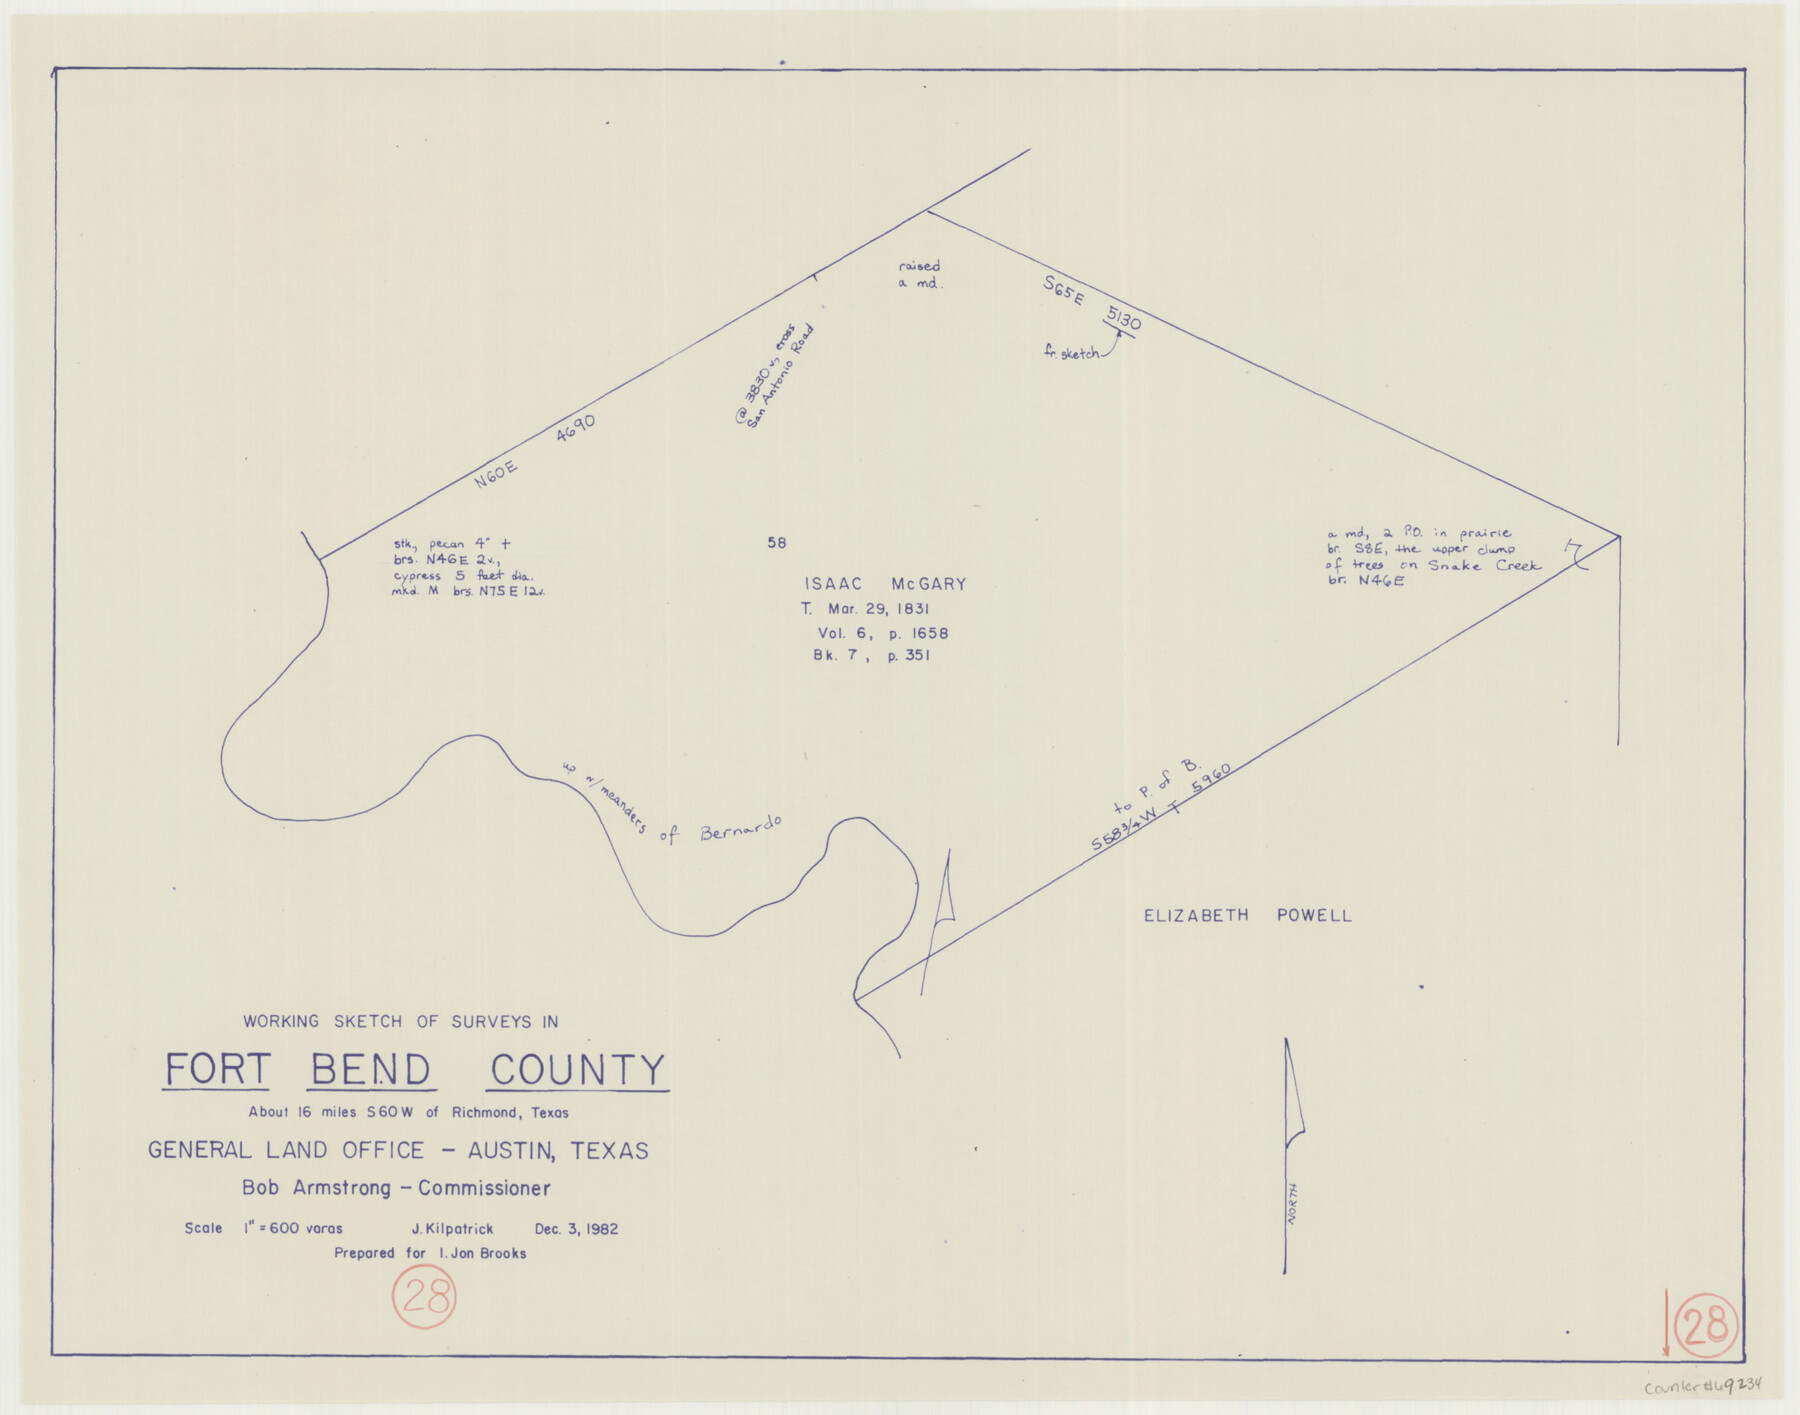 69234, Fort Bend County Working Sketch 28, General Map Collection